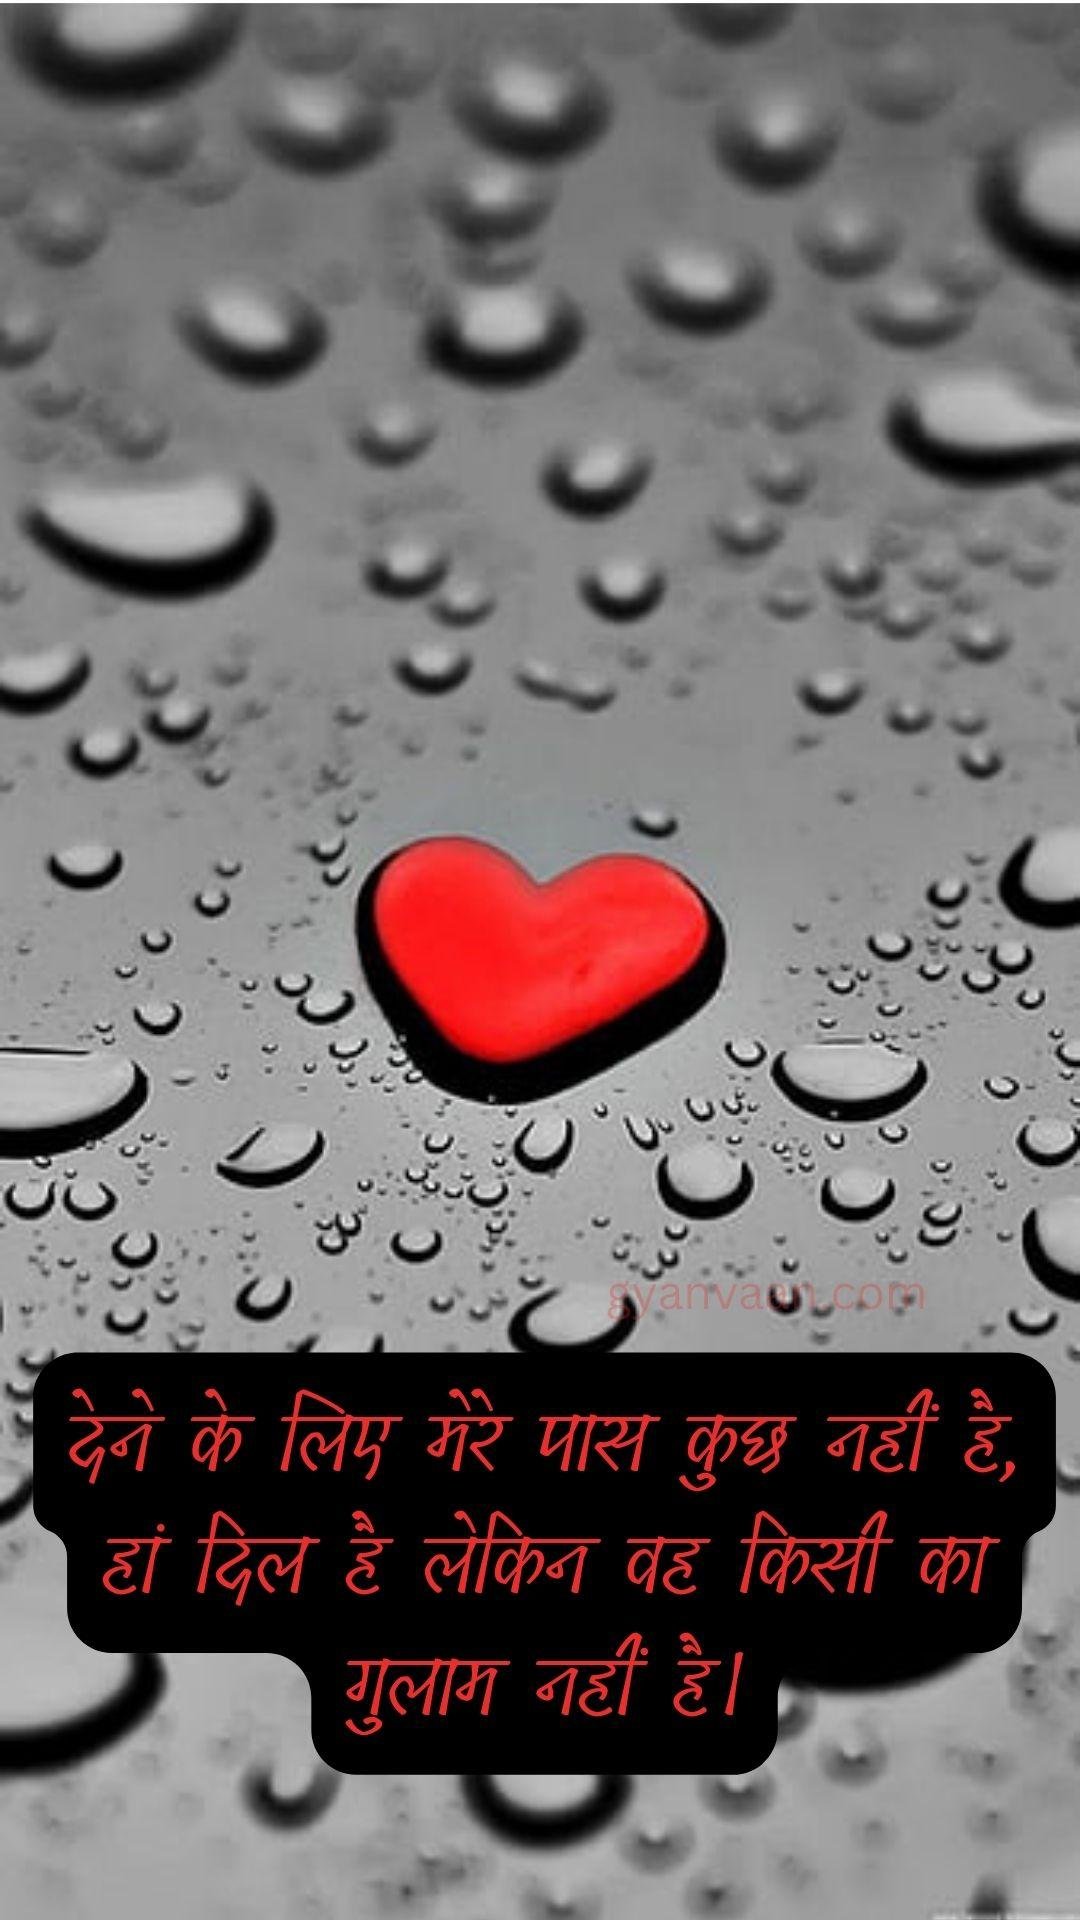 Very Heart Touching Sad Quotes In Hindi For Mobile Devices 13 - Very Heart Touching Sad Quotes In Hindi